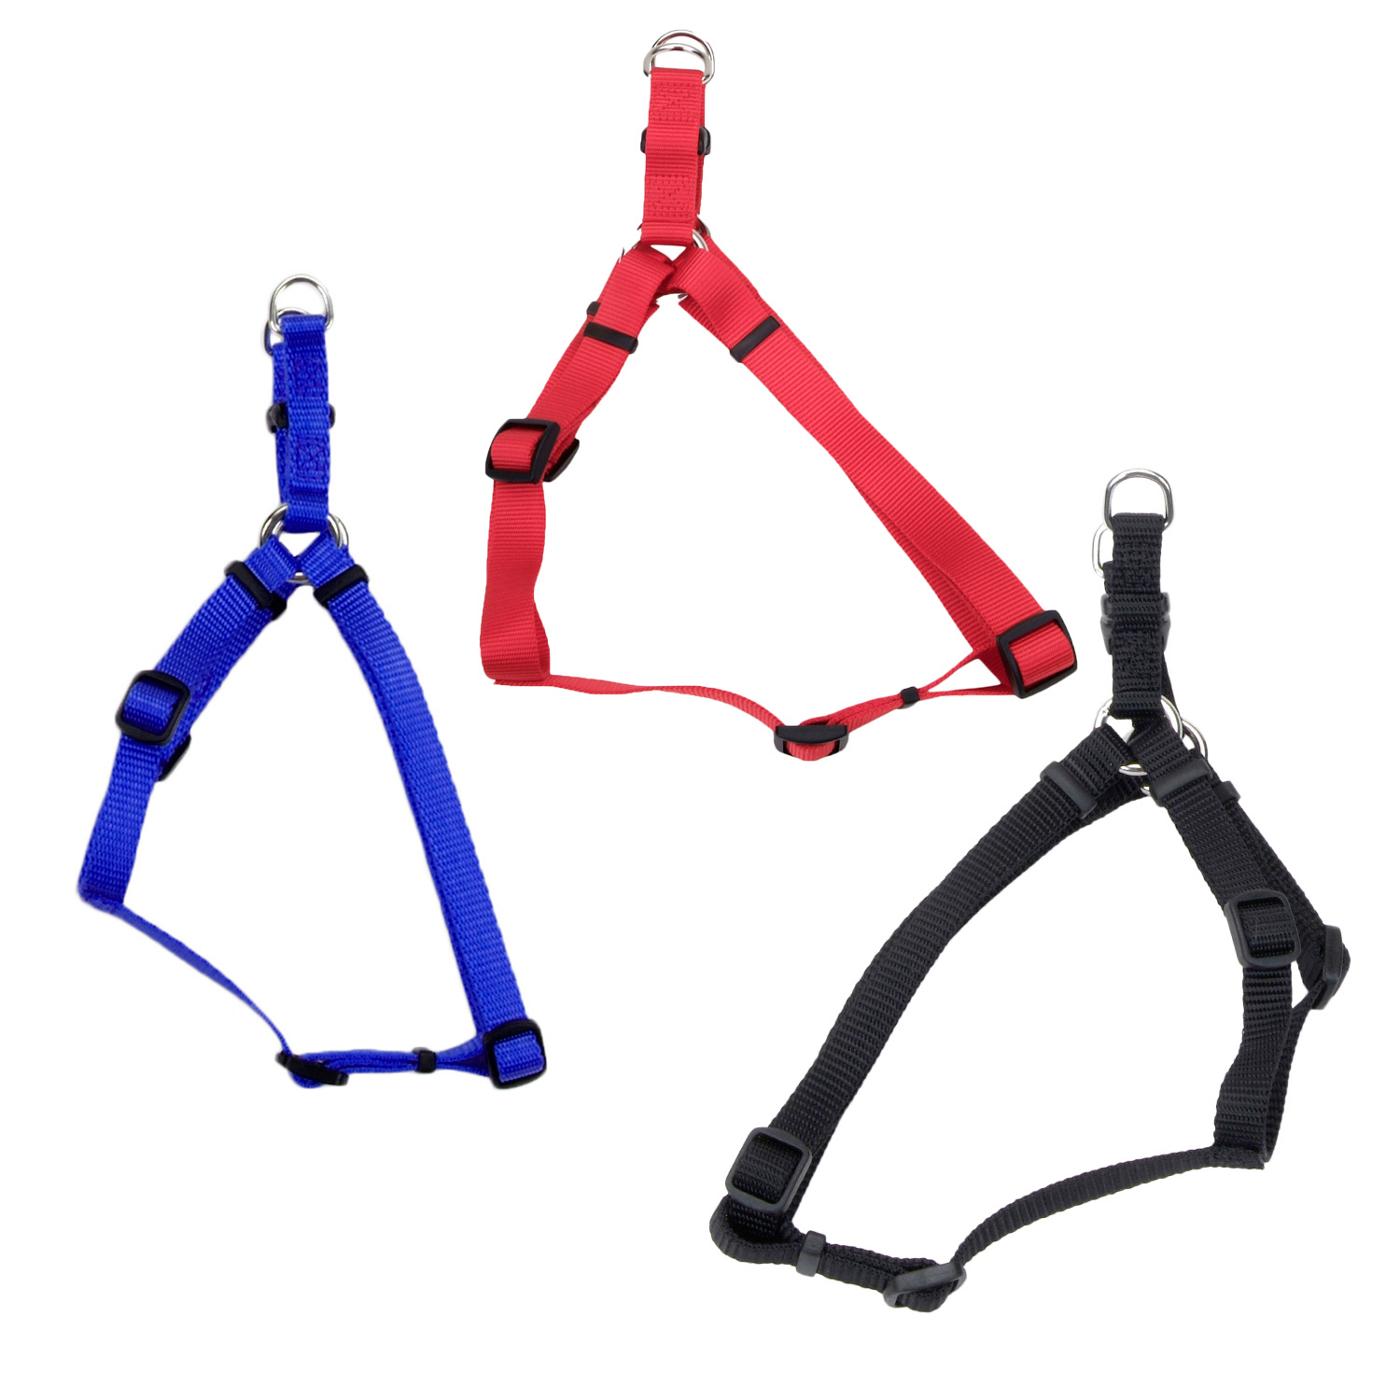 Coastal Pet Products Blue, Black or Red 3/8 inch Comfort Wrap Harness, Assorted Colors; image 4 of 4